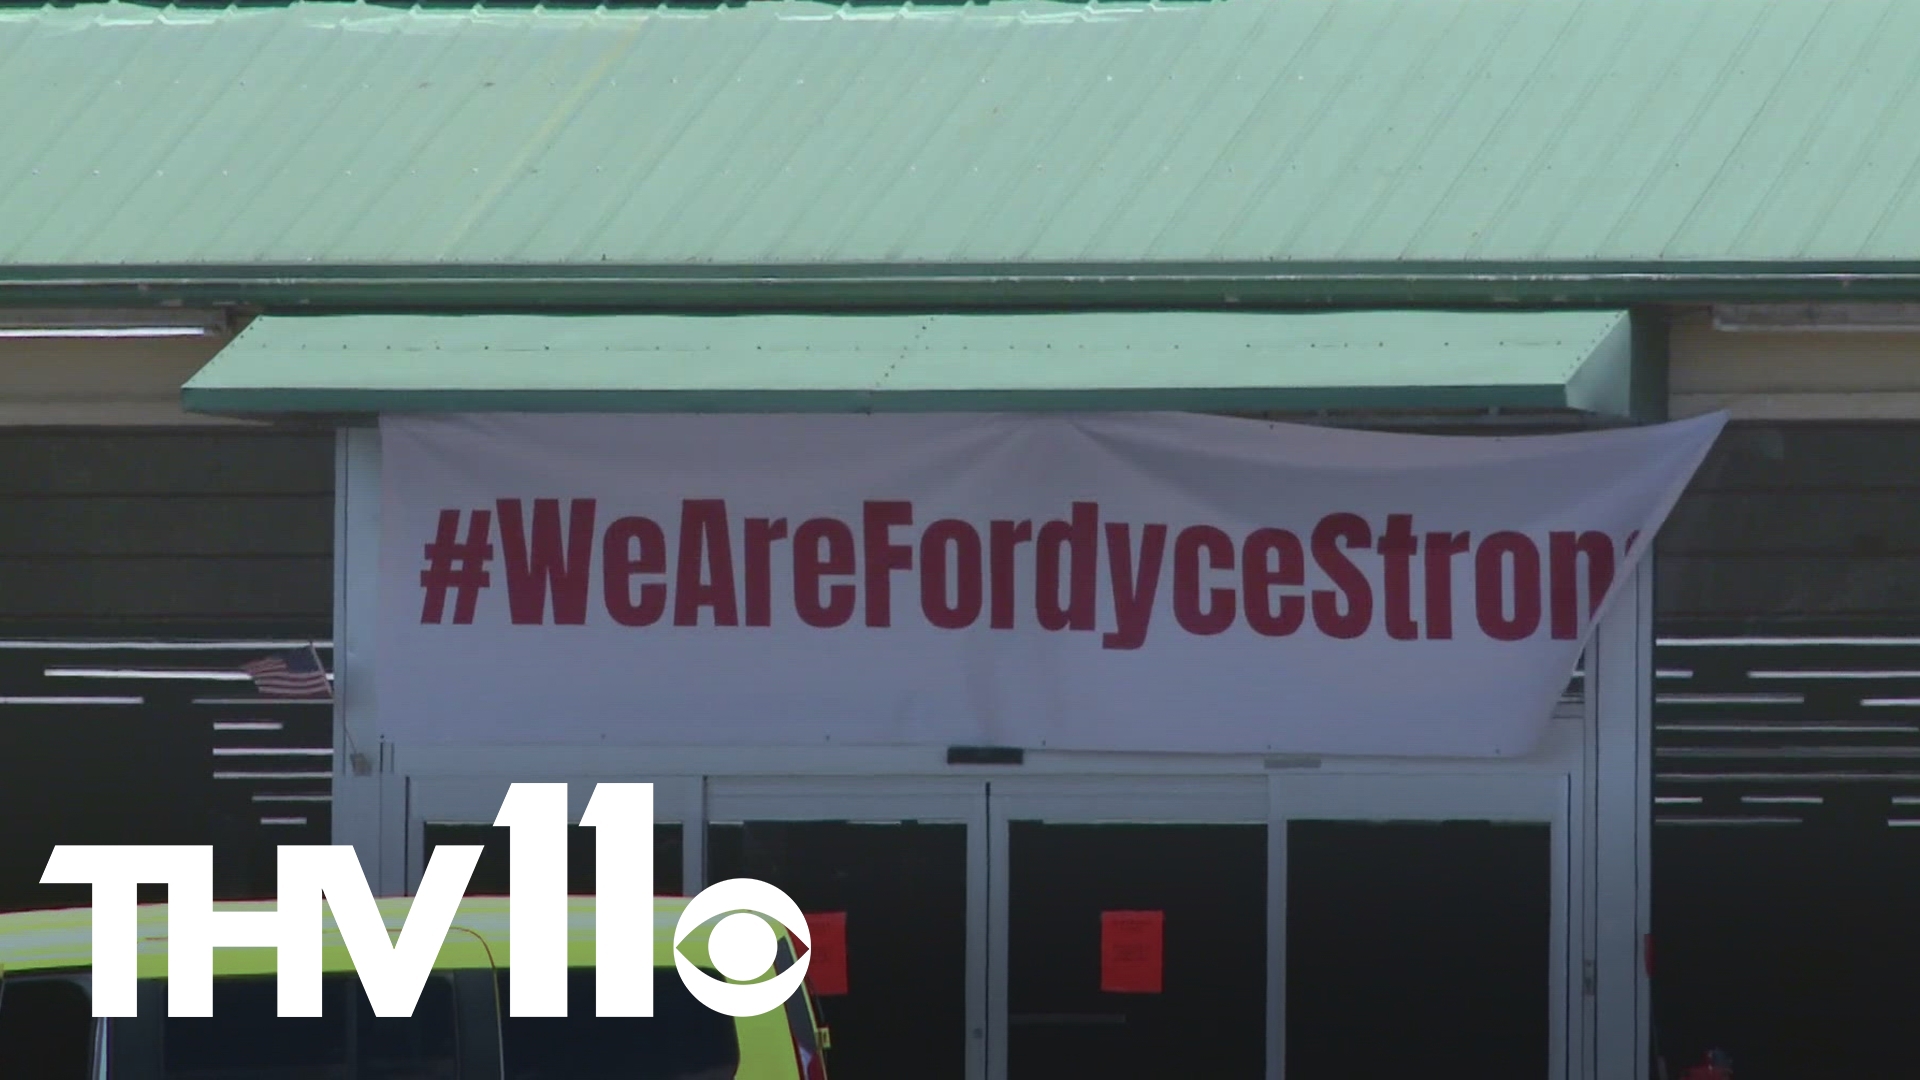 After the tragic and deadly mass shooting on June 21 devastated the Fordyce community, the ARCF established a fund to provide direct aid to those impacted.